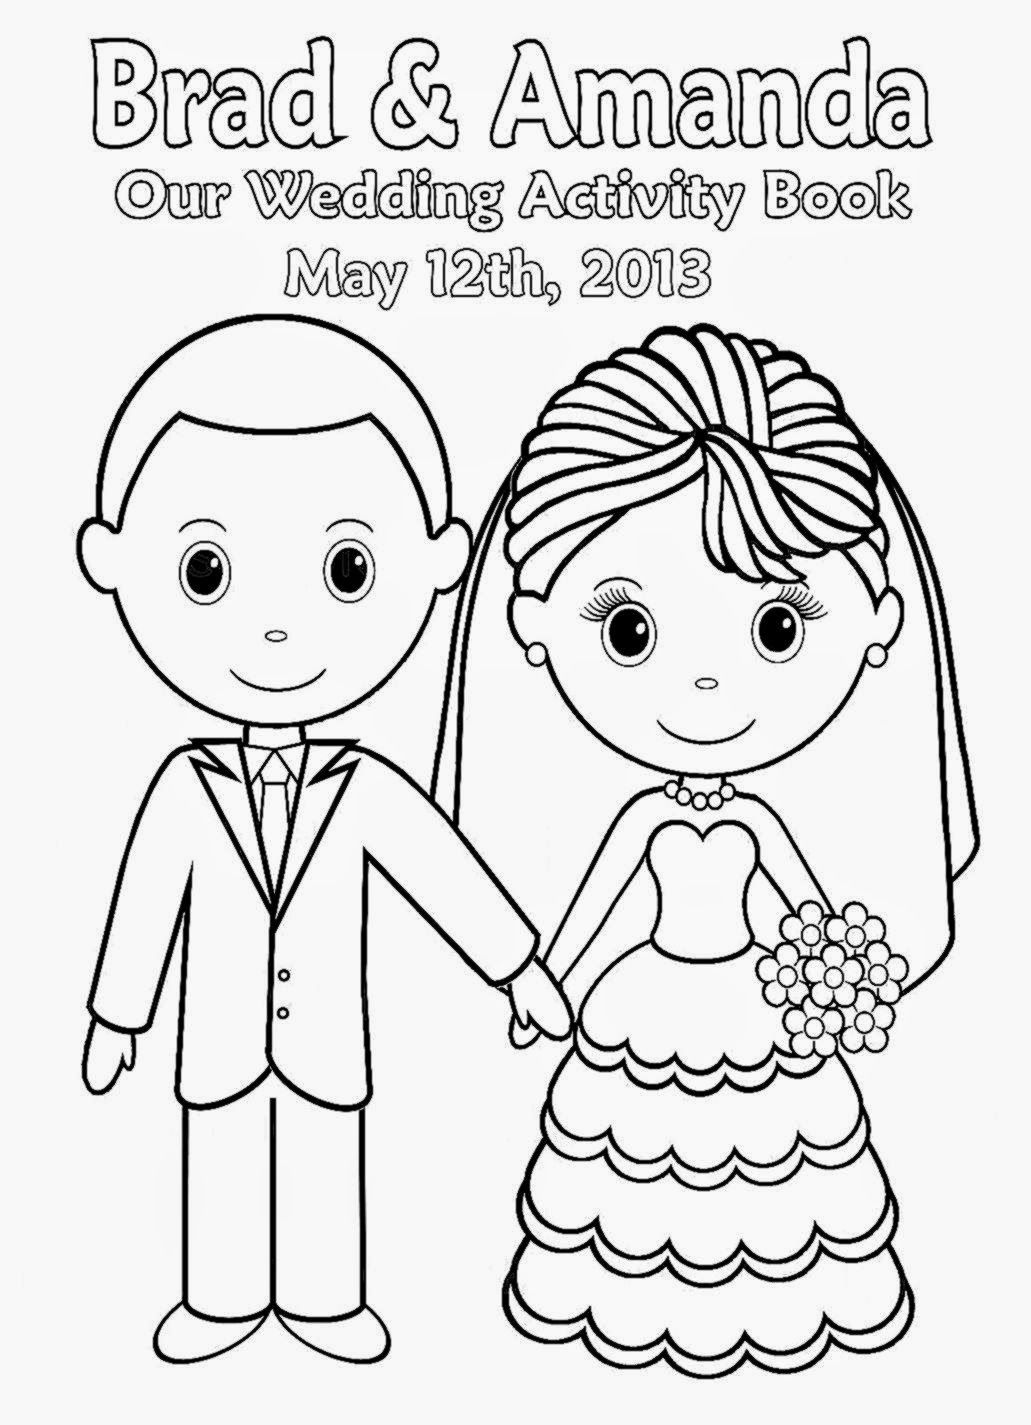 Download Free Coloring Pages For Wedding Coloring Books Coloring Coloring Home